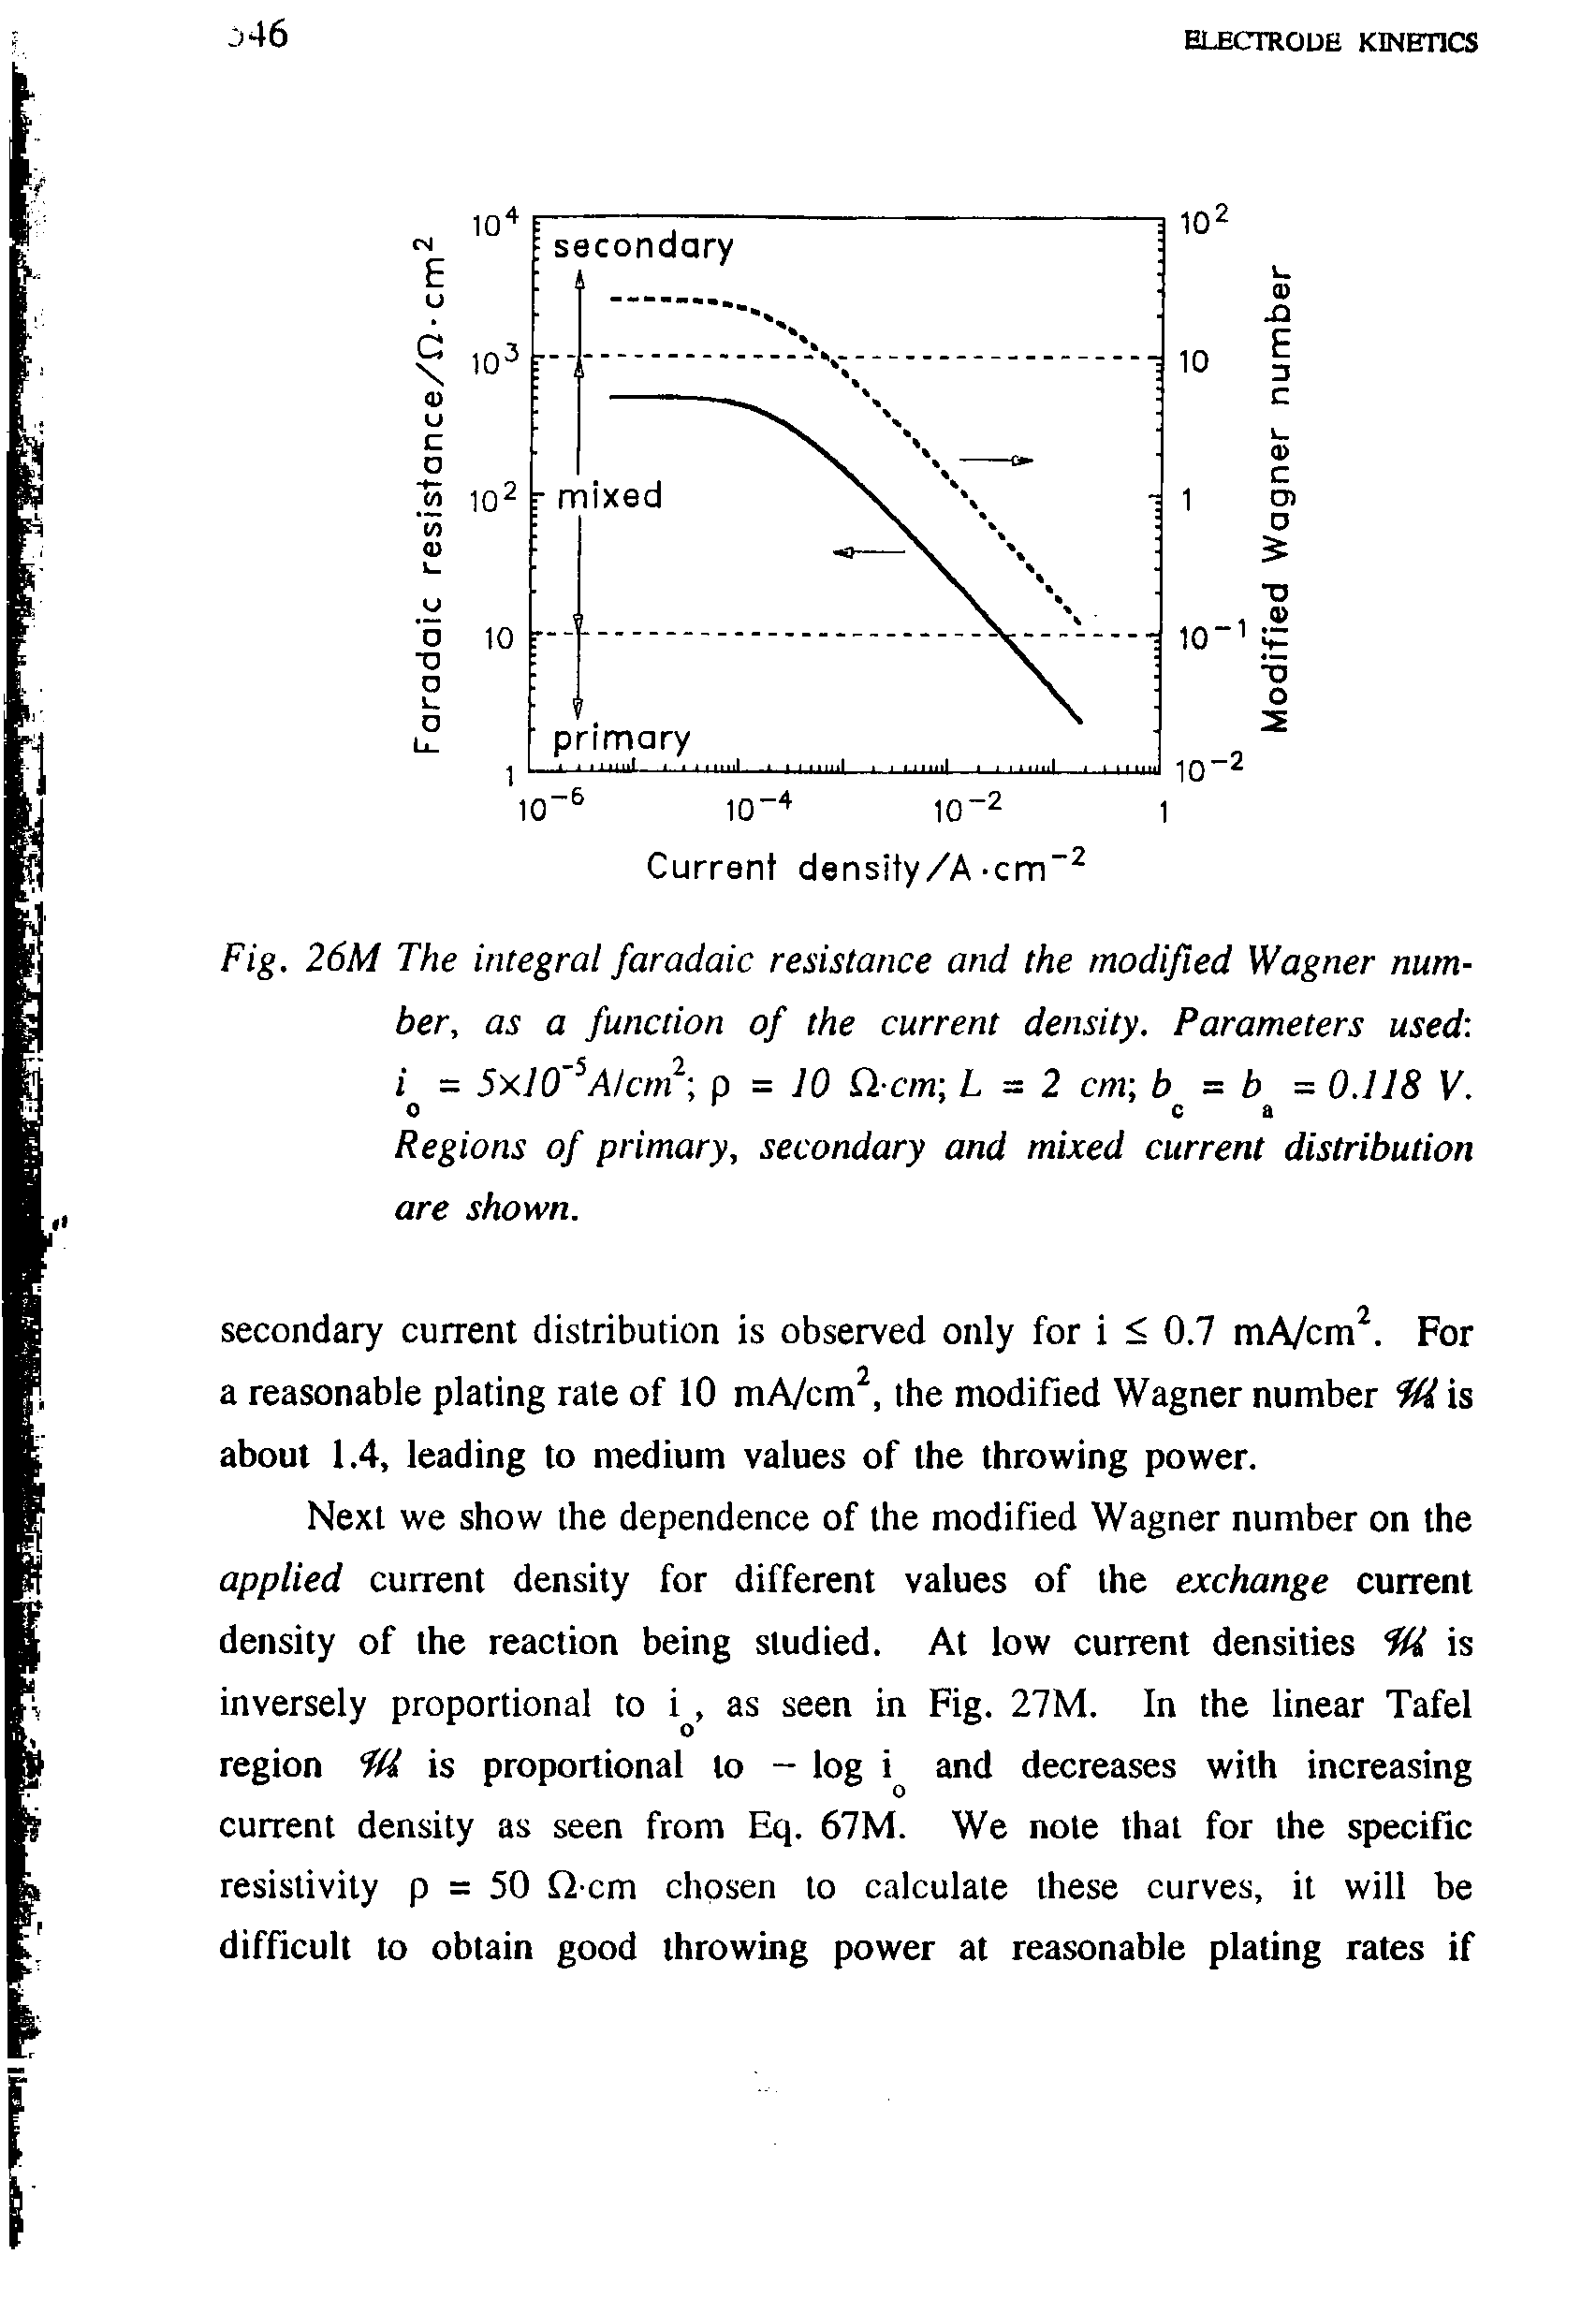 Fig. 26M The integral faradaic resistance and the modified Wagner number, as a function of the current density. Parameters used i = 5x10 Alcm p = JO Q. cm L - 2 cm b = b = 0.118 V.